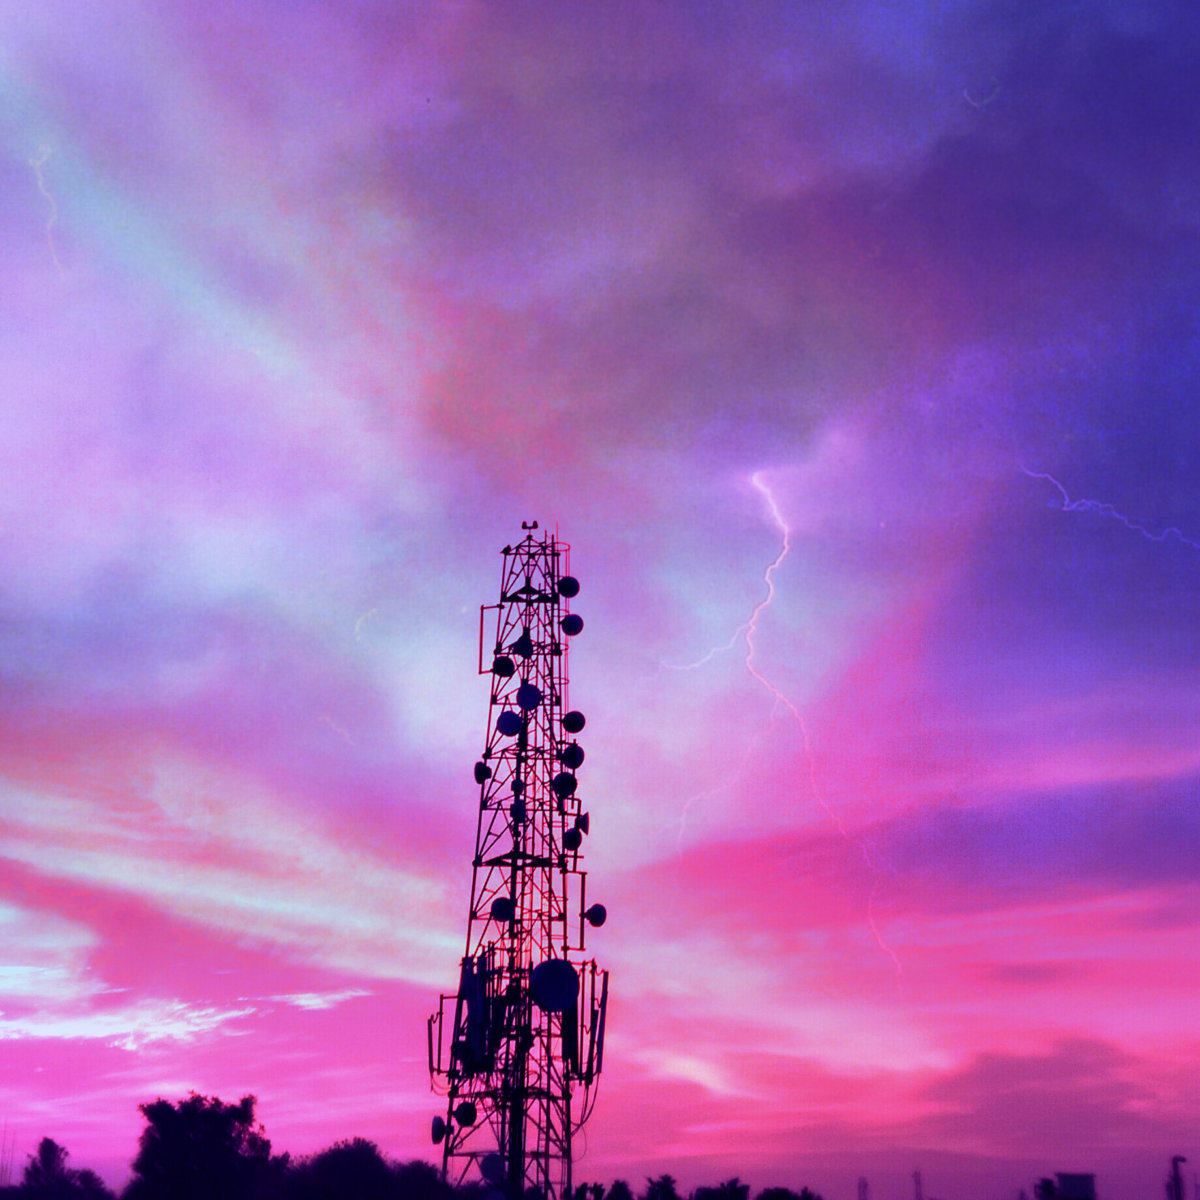 Low Angle View Of Communications Tower Against Dramatic Sky